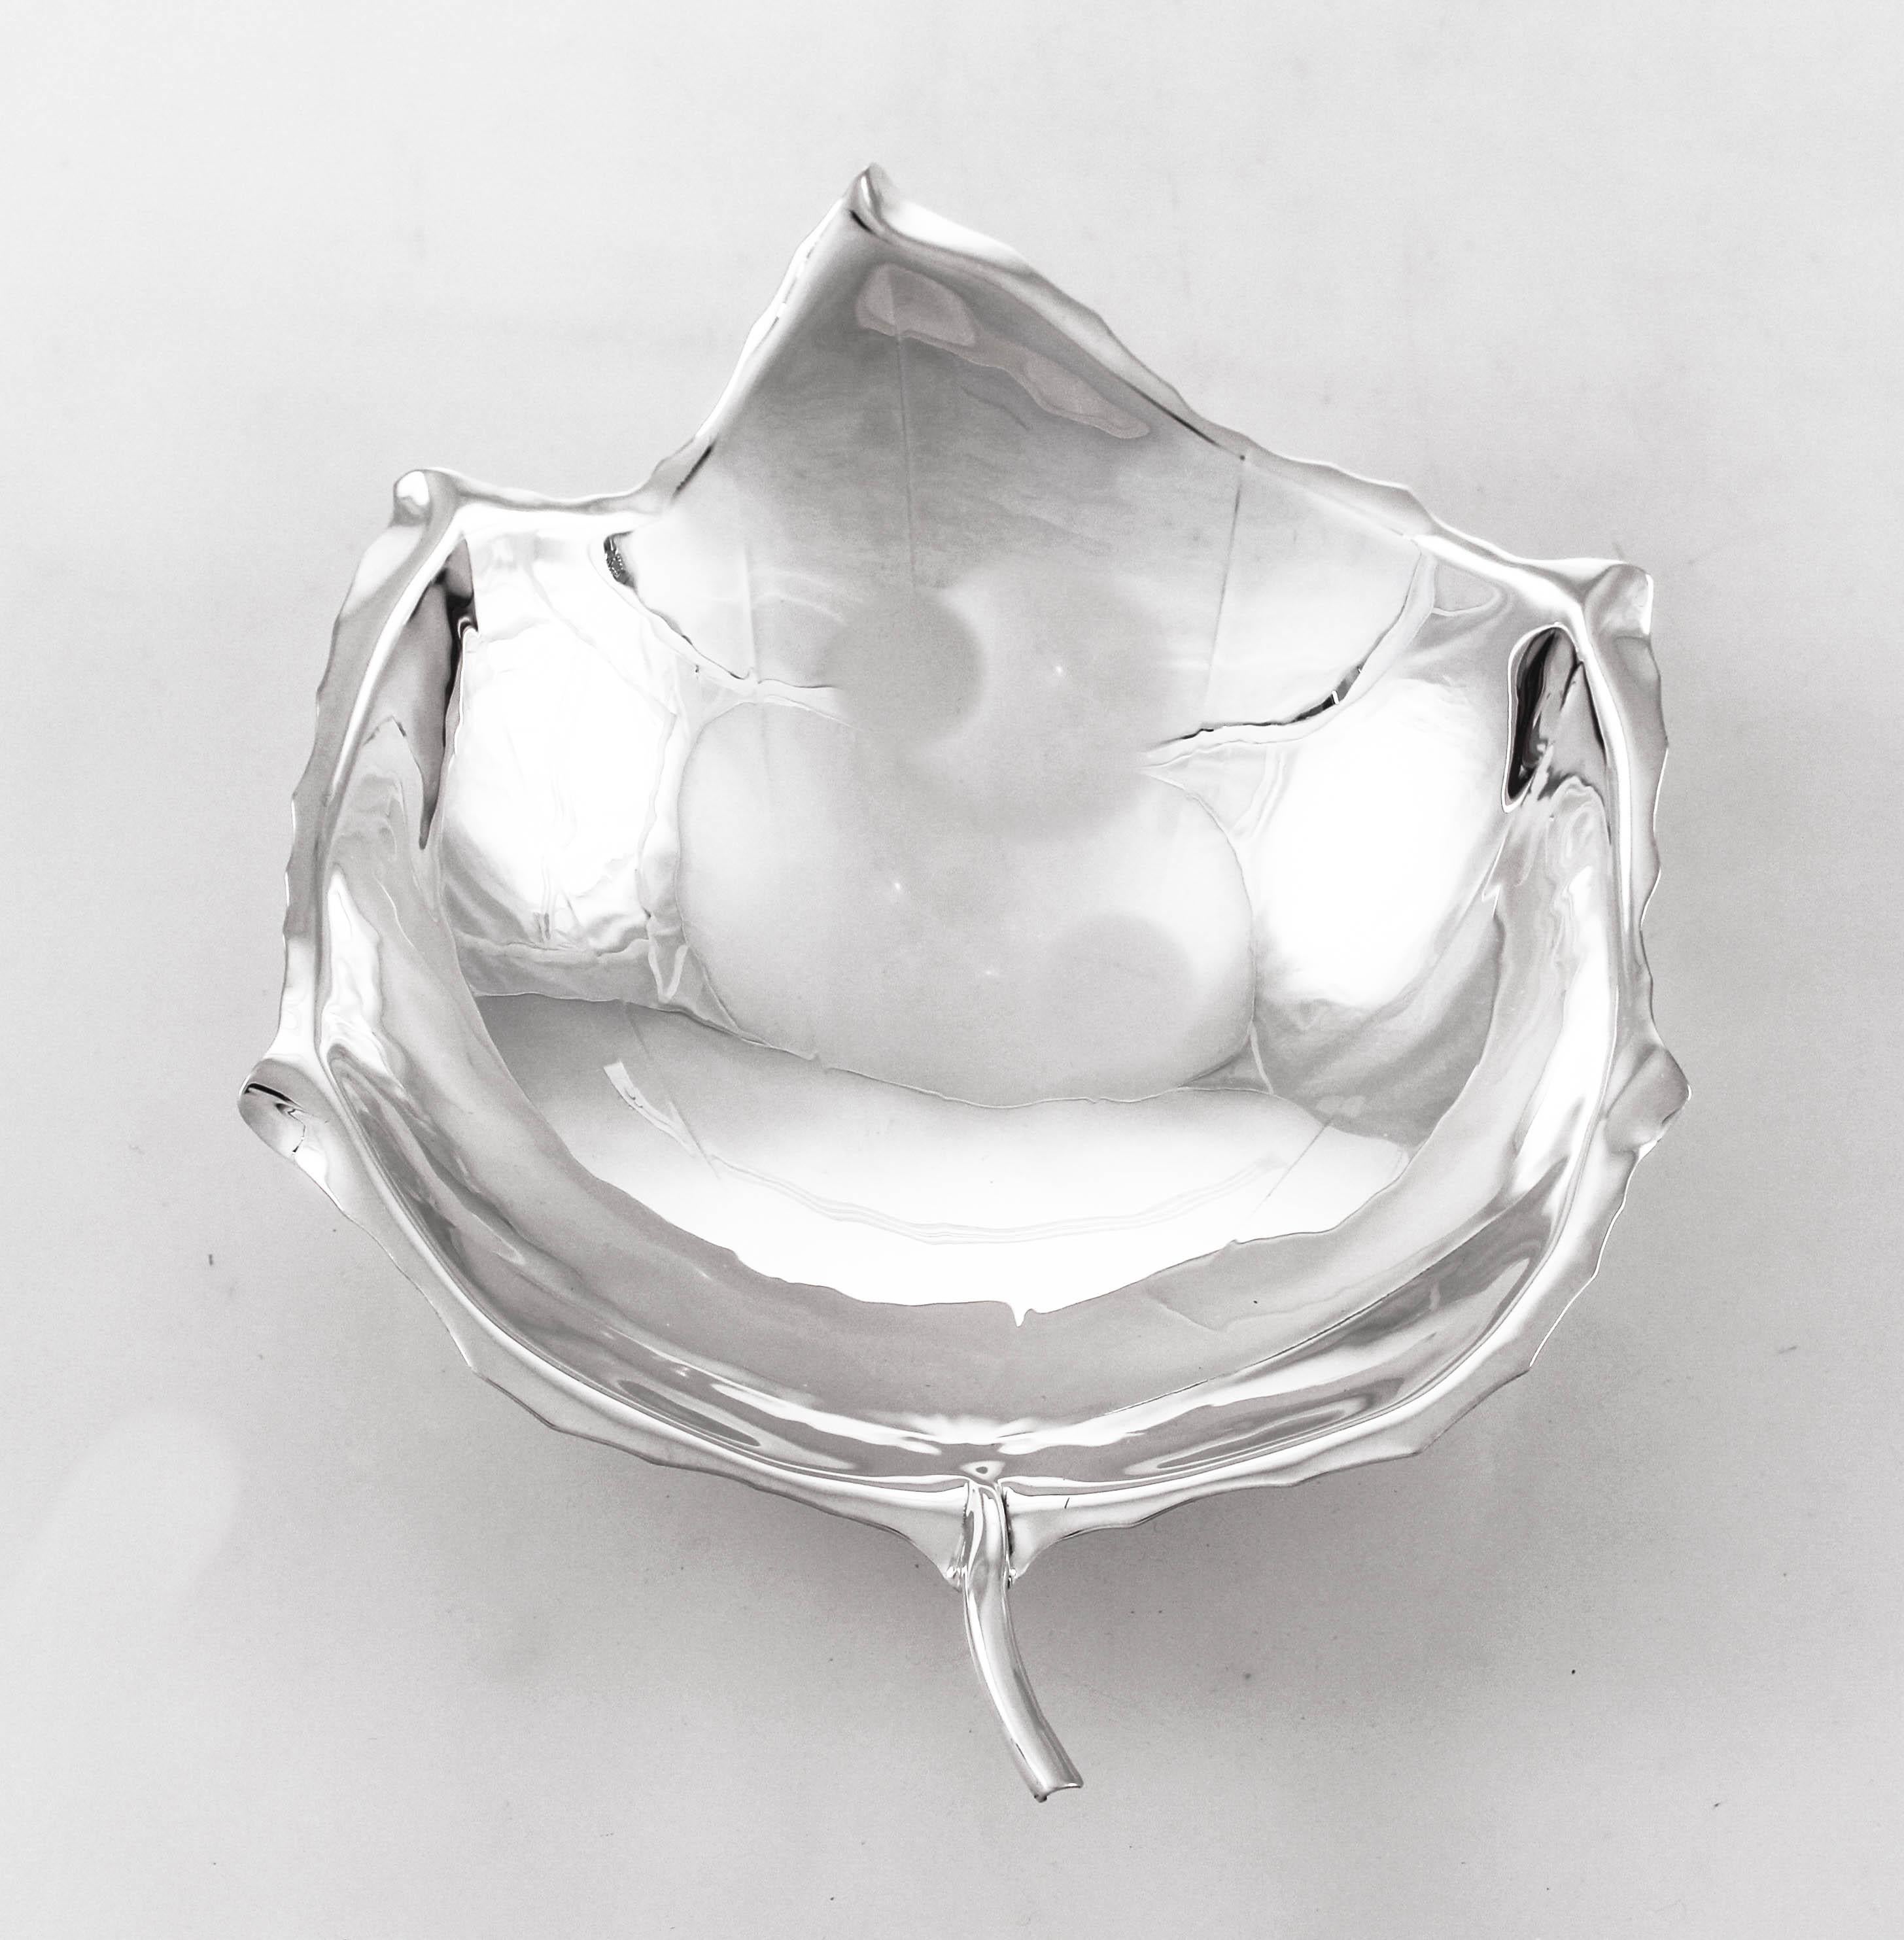 Sciarrotta’s work is characterized by a sleek and simple style, and many of his smaller pieces feature his signature leaf-shape designs. During the 1950s and 1960s, Sciarrotta’s handmade silver serving dishes, bowls, candelabras, vases, trays boxes,